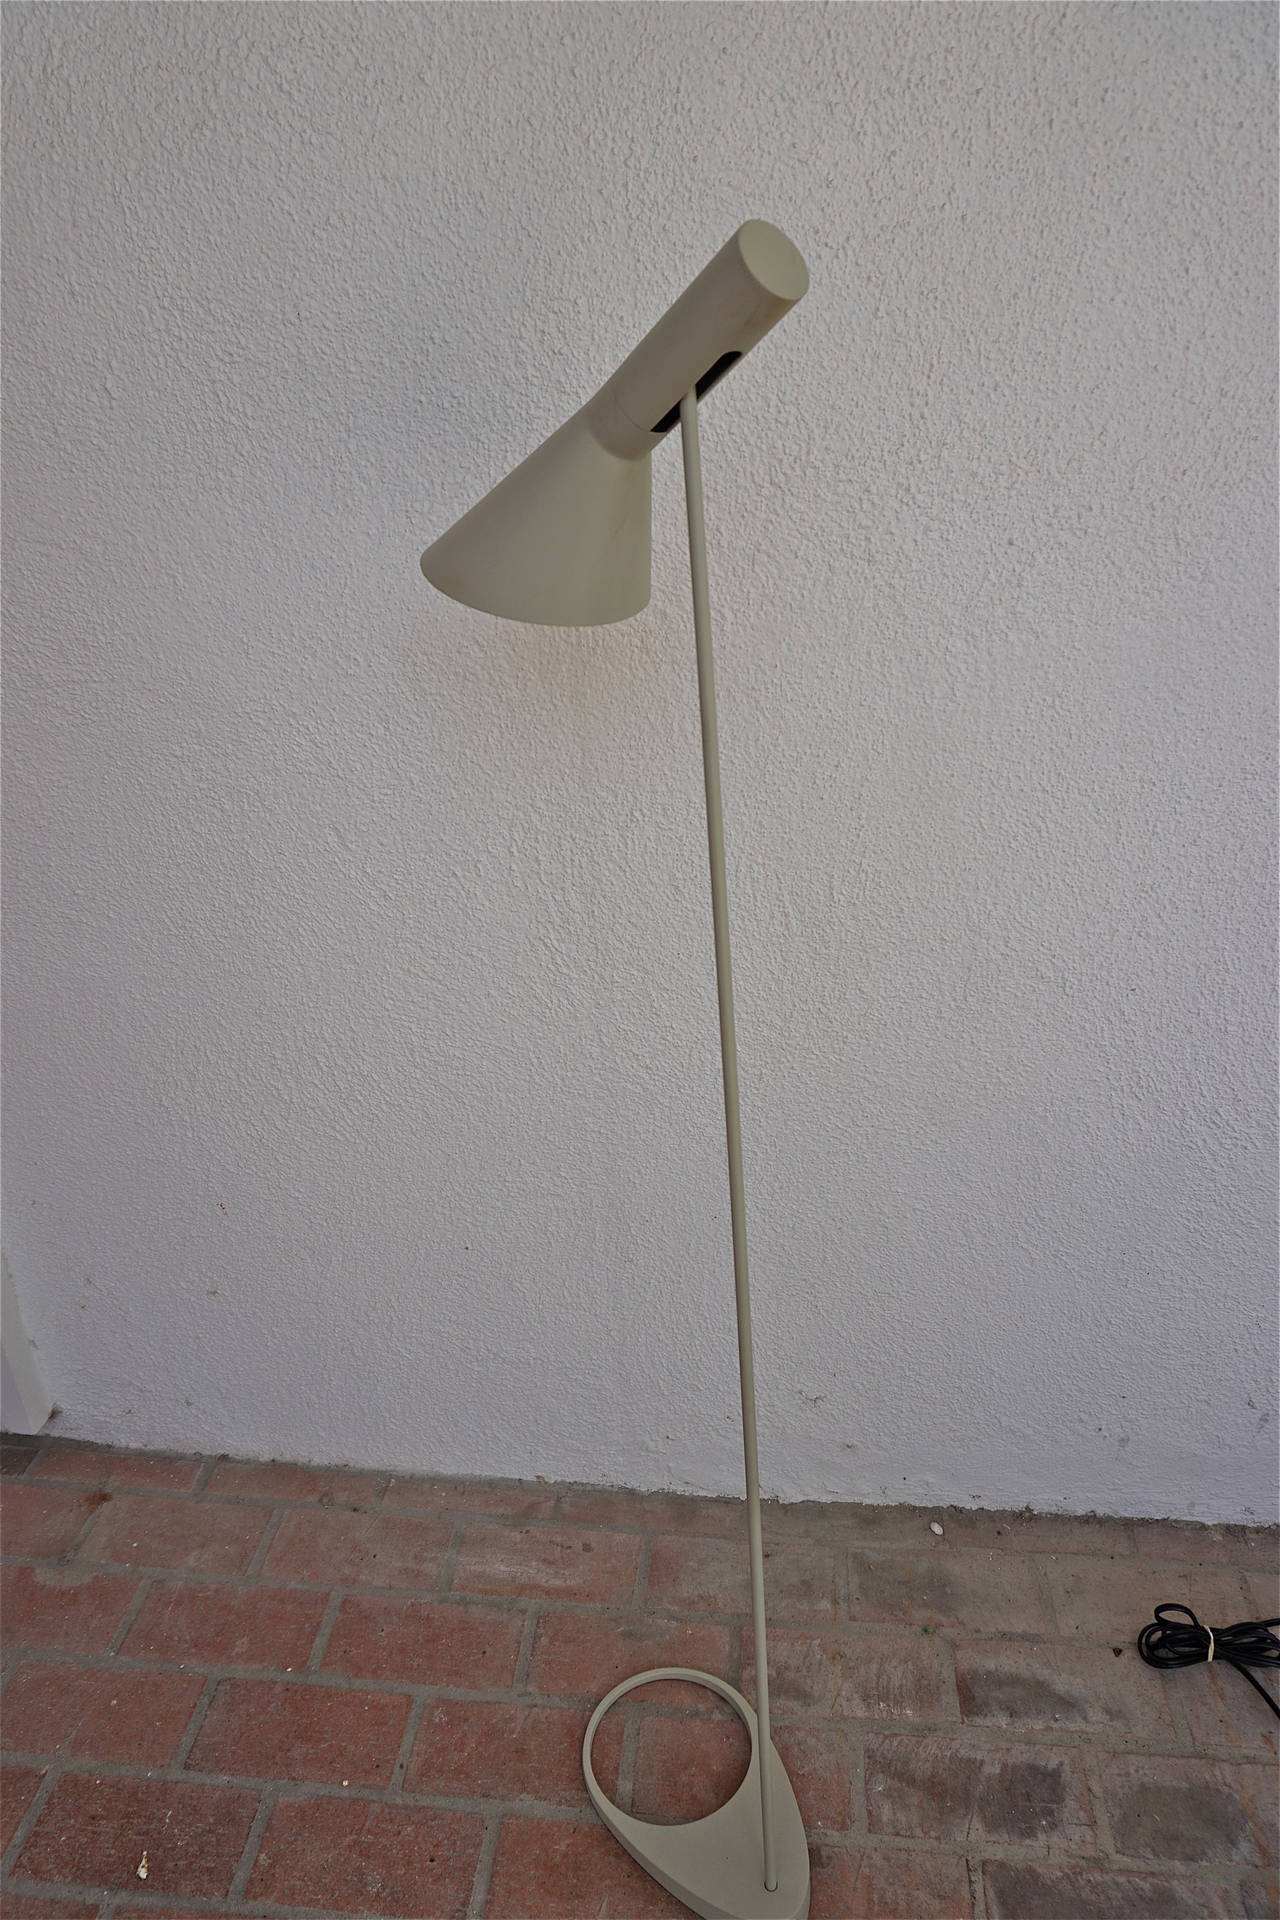 Designed by Jacobsen for Louis Poulson in 1957. Tilting shade offers a variety of lighting options.
Light gray finish.